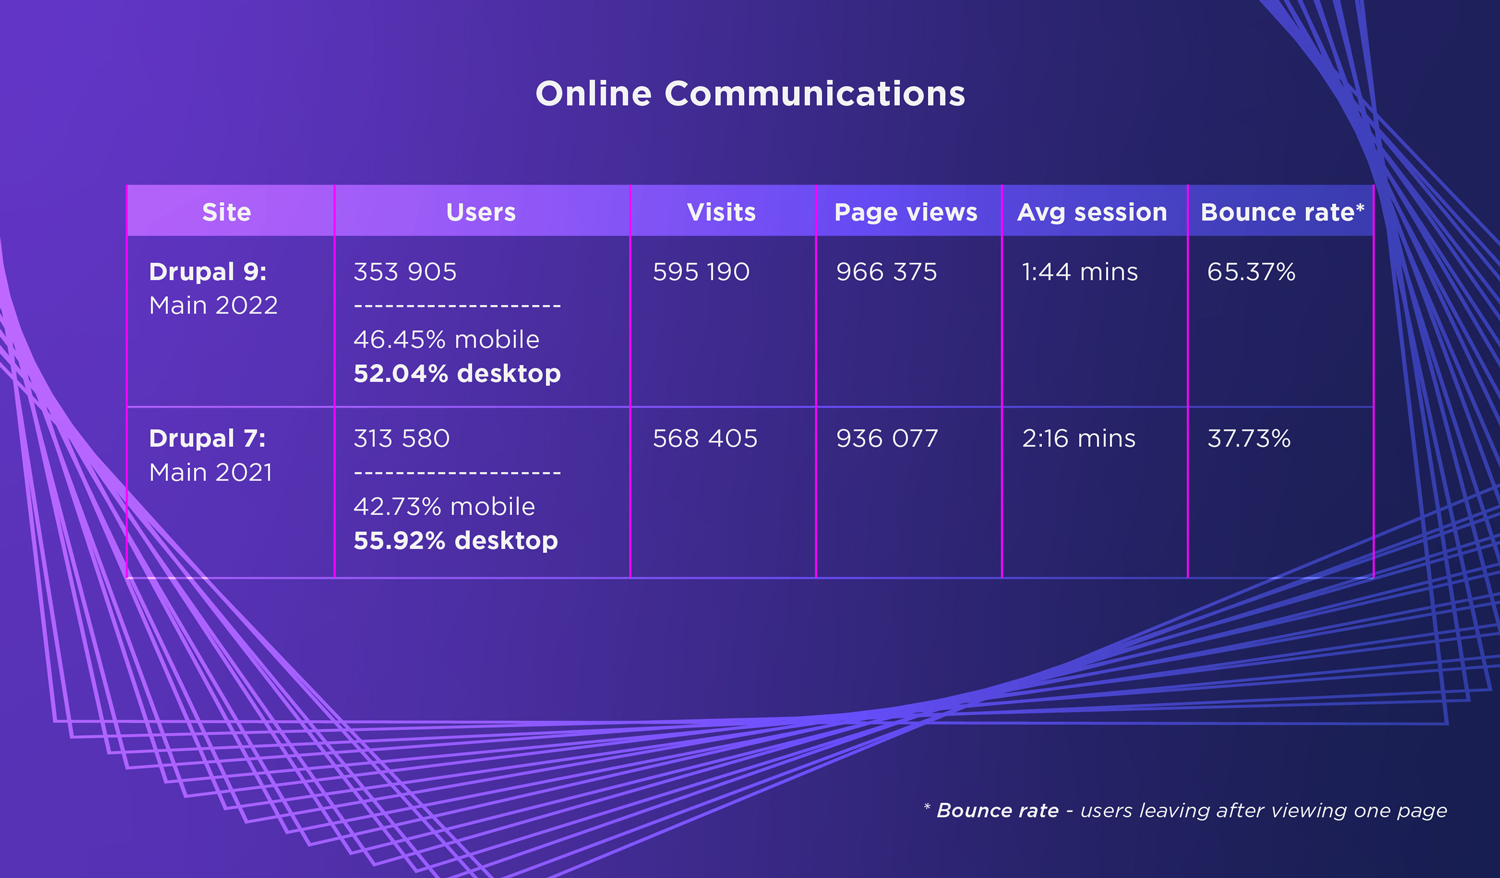 CMD Annual Report 2022 - Online Comms Infographic